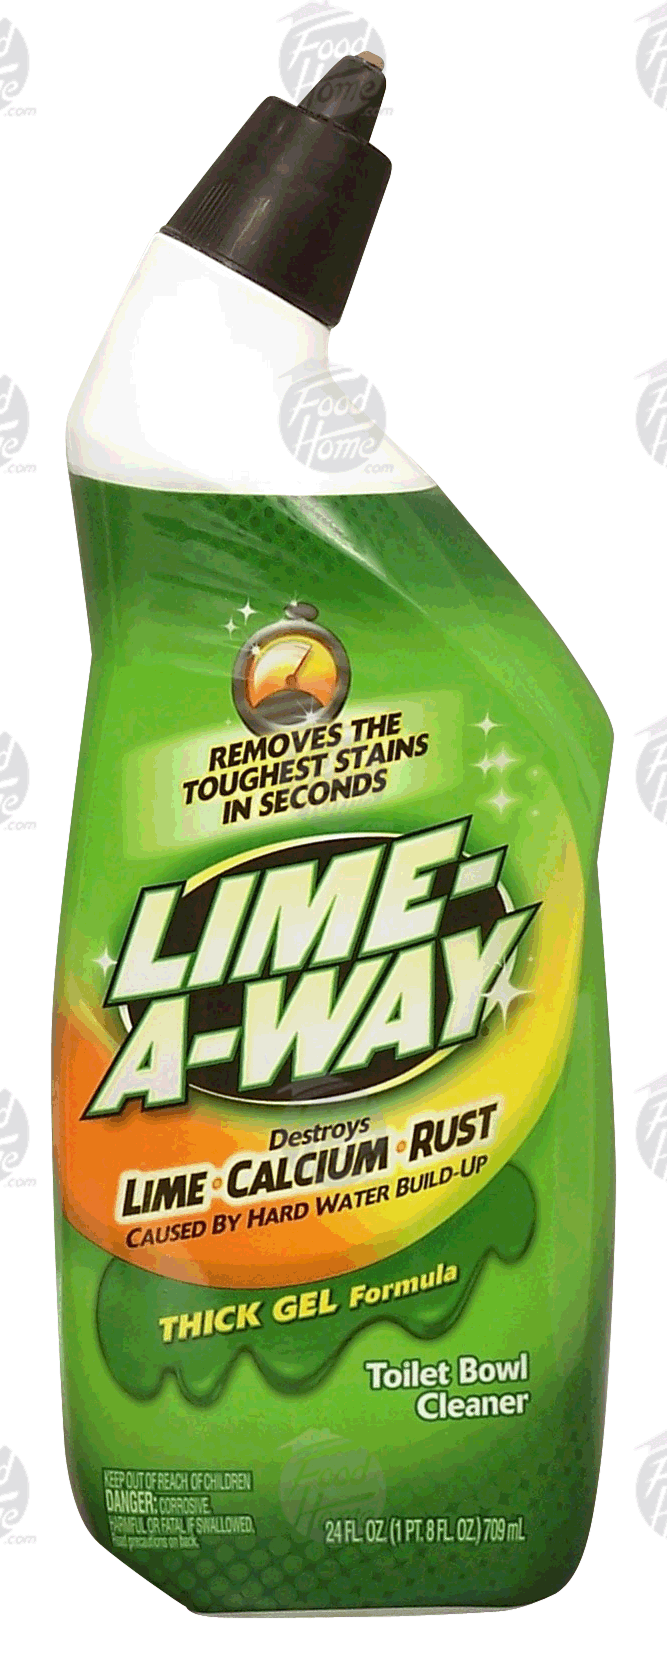 Lime-a-way  toilet bowl cleaner, thick gel formula, destroys lime, calcium & rust, professional strength Full-Size Picture